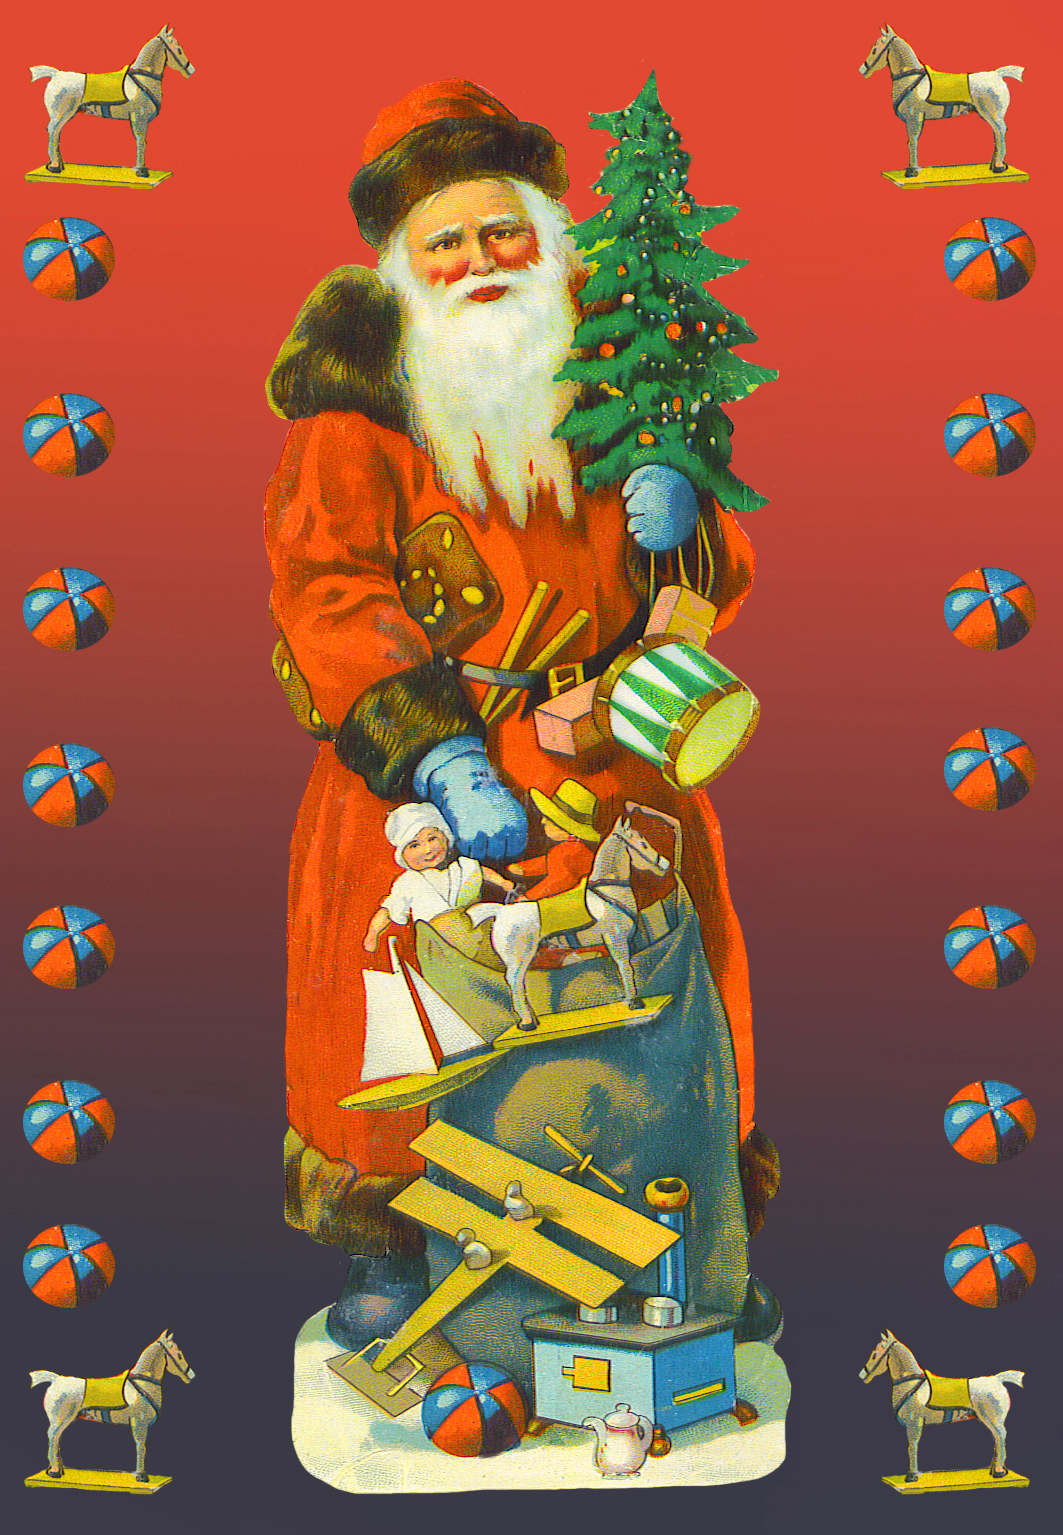 Santa Claus with presents